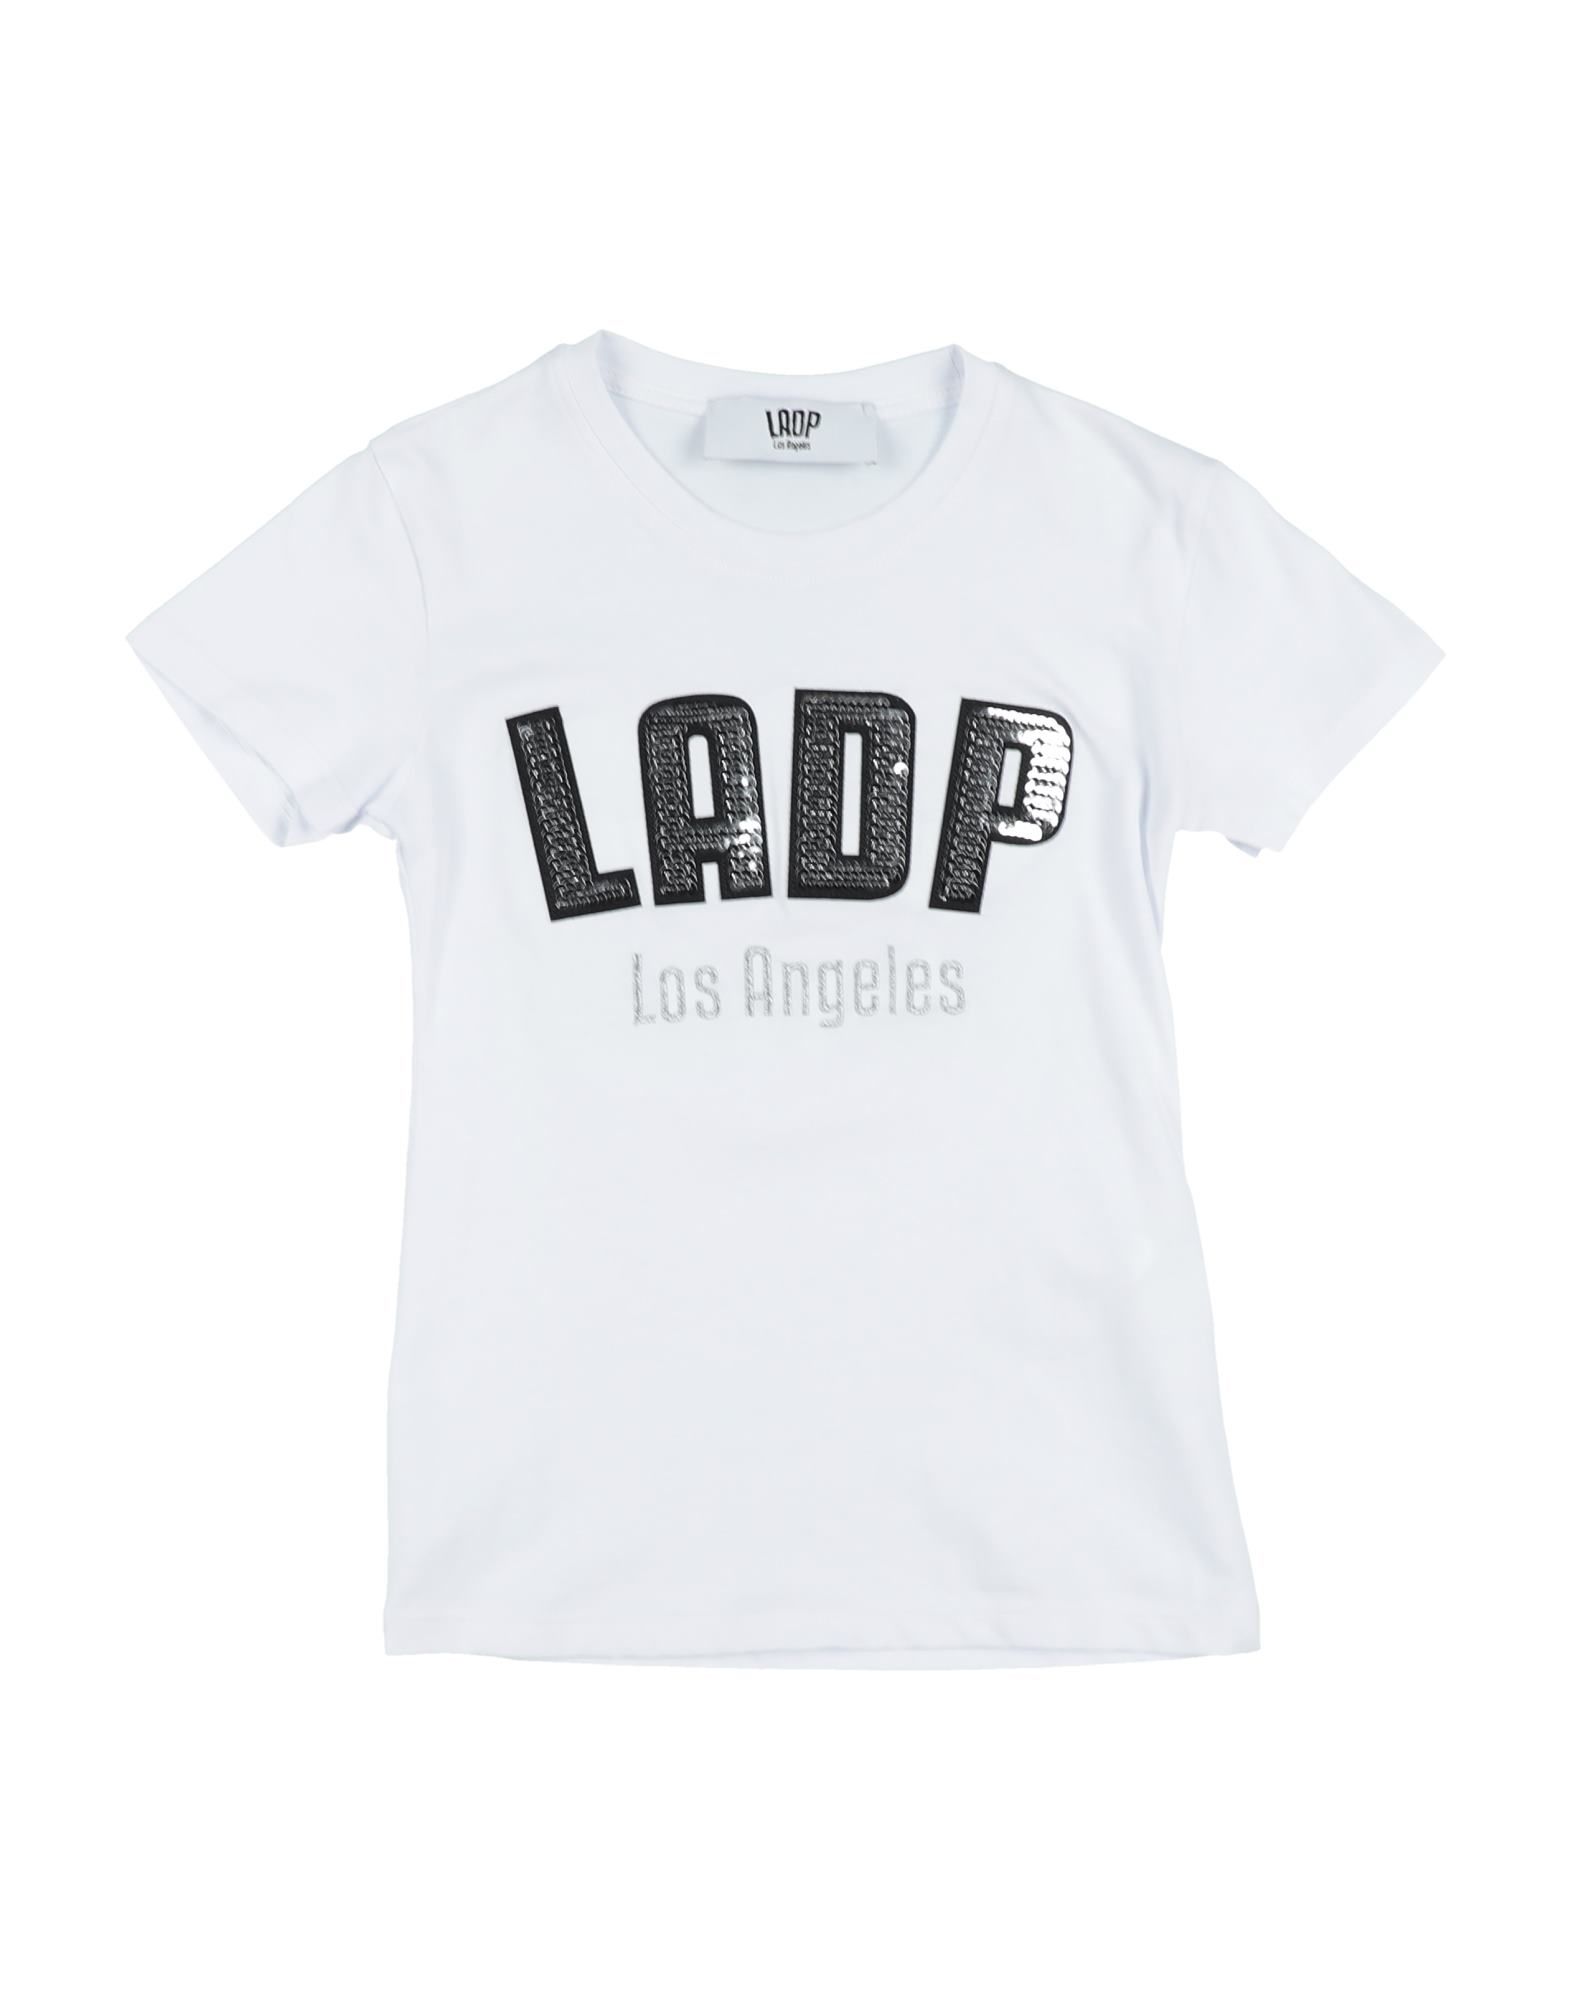 Ladp Kids' T-shirts In White